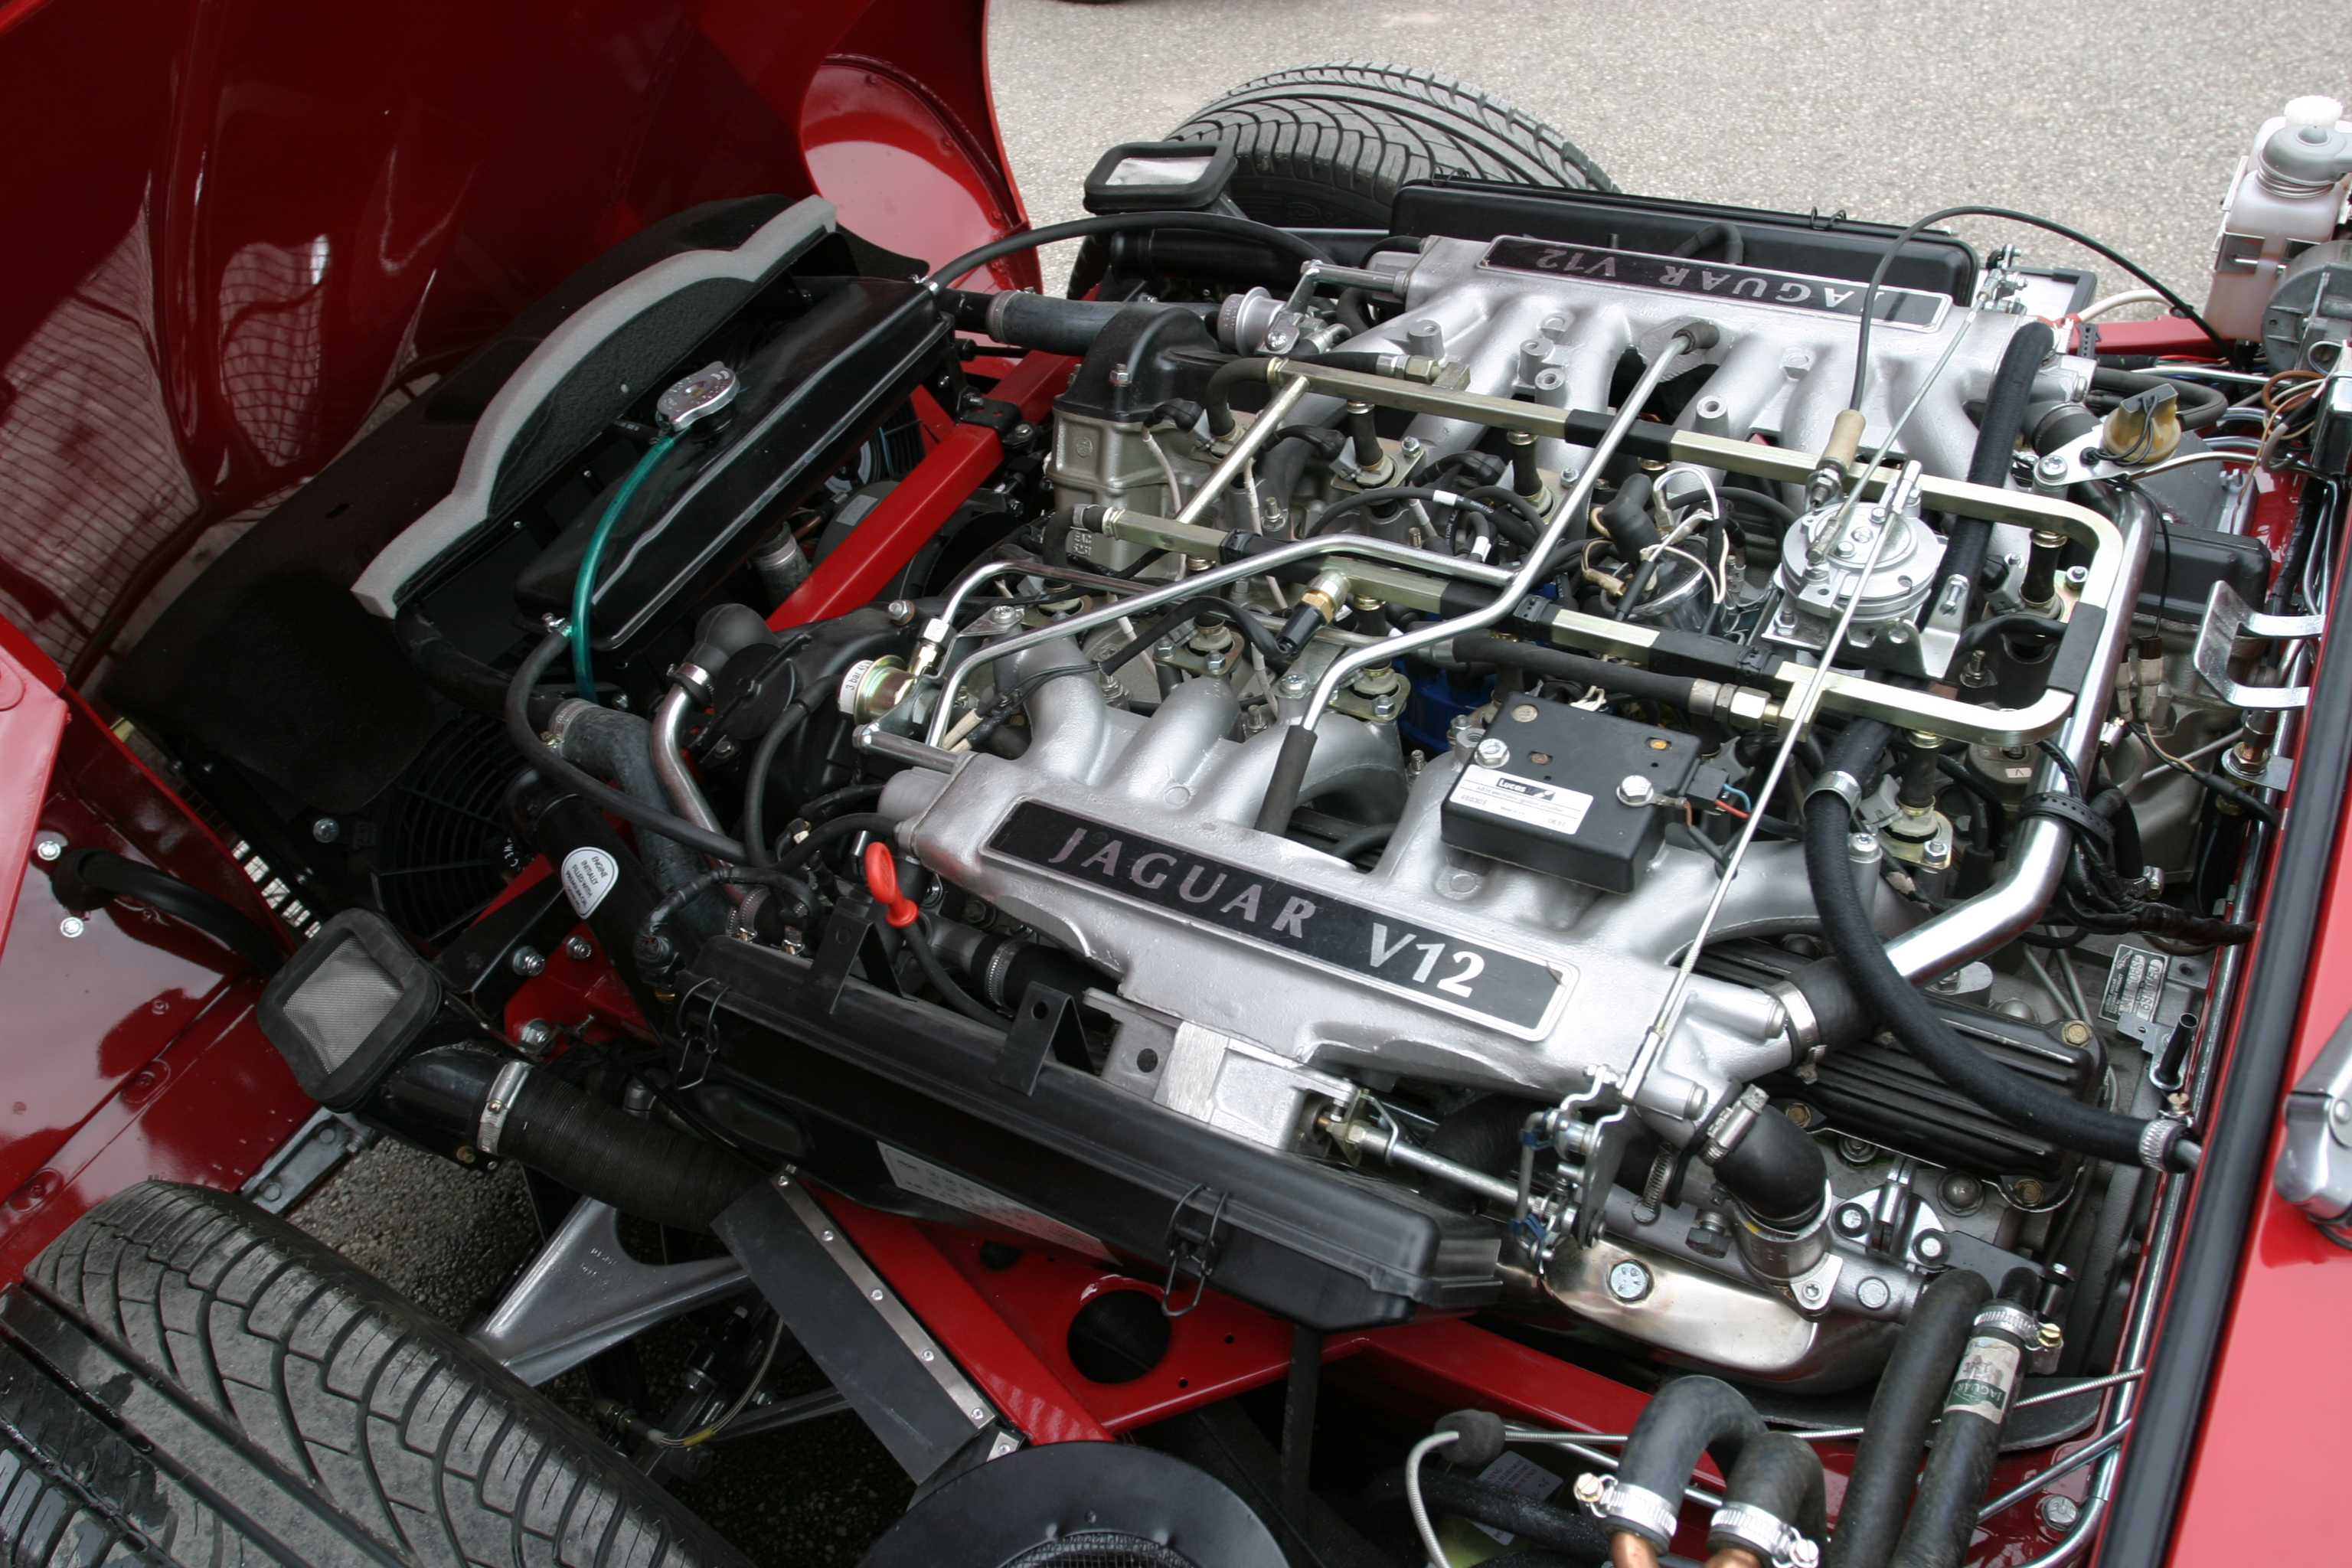 V12 E Type with EFI from an XJS.